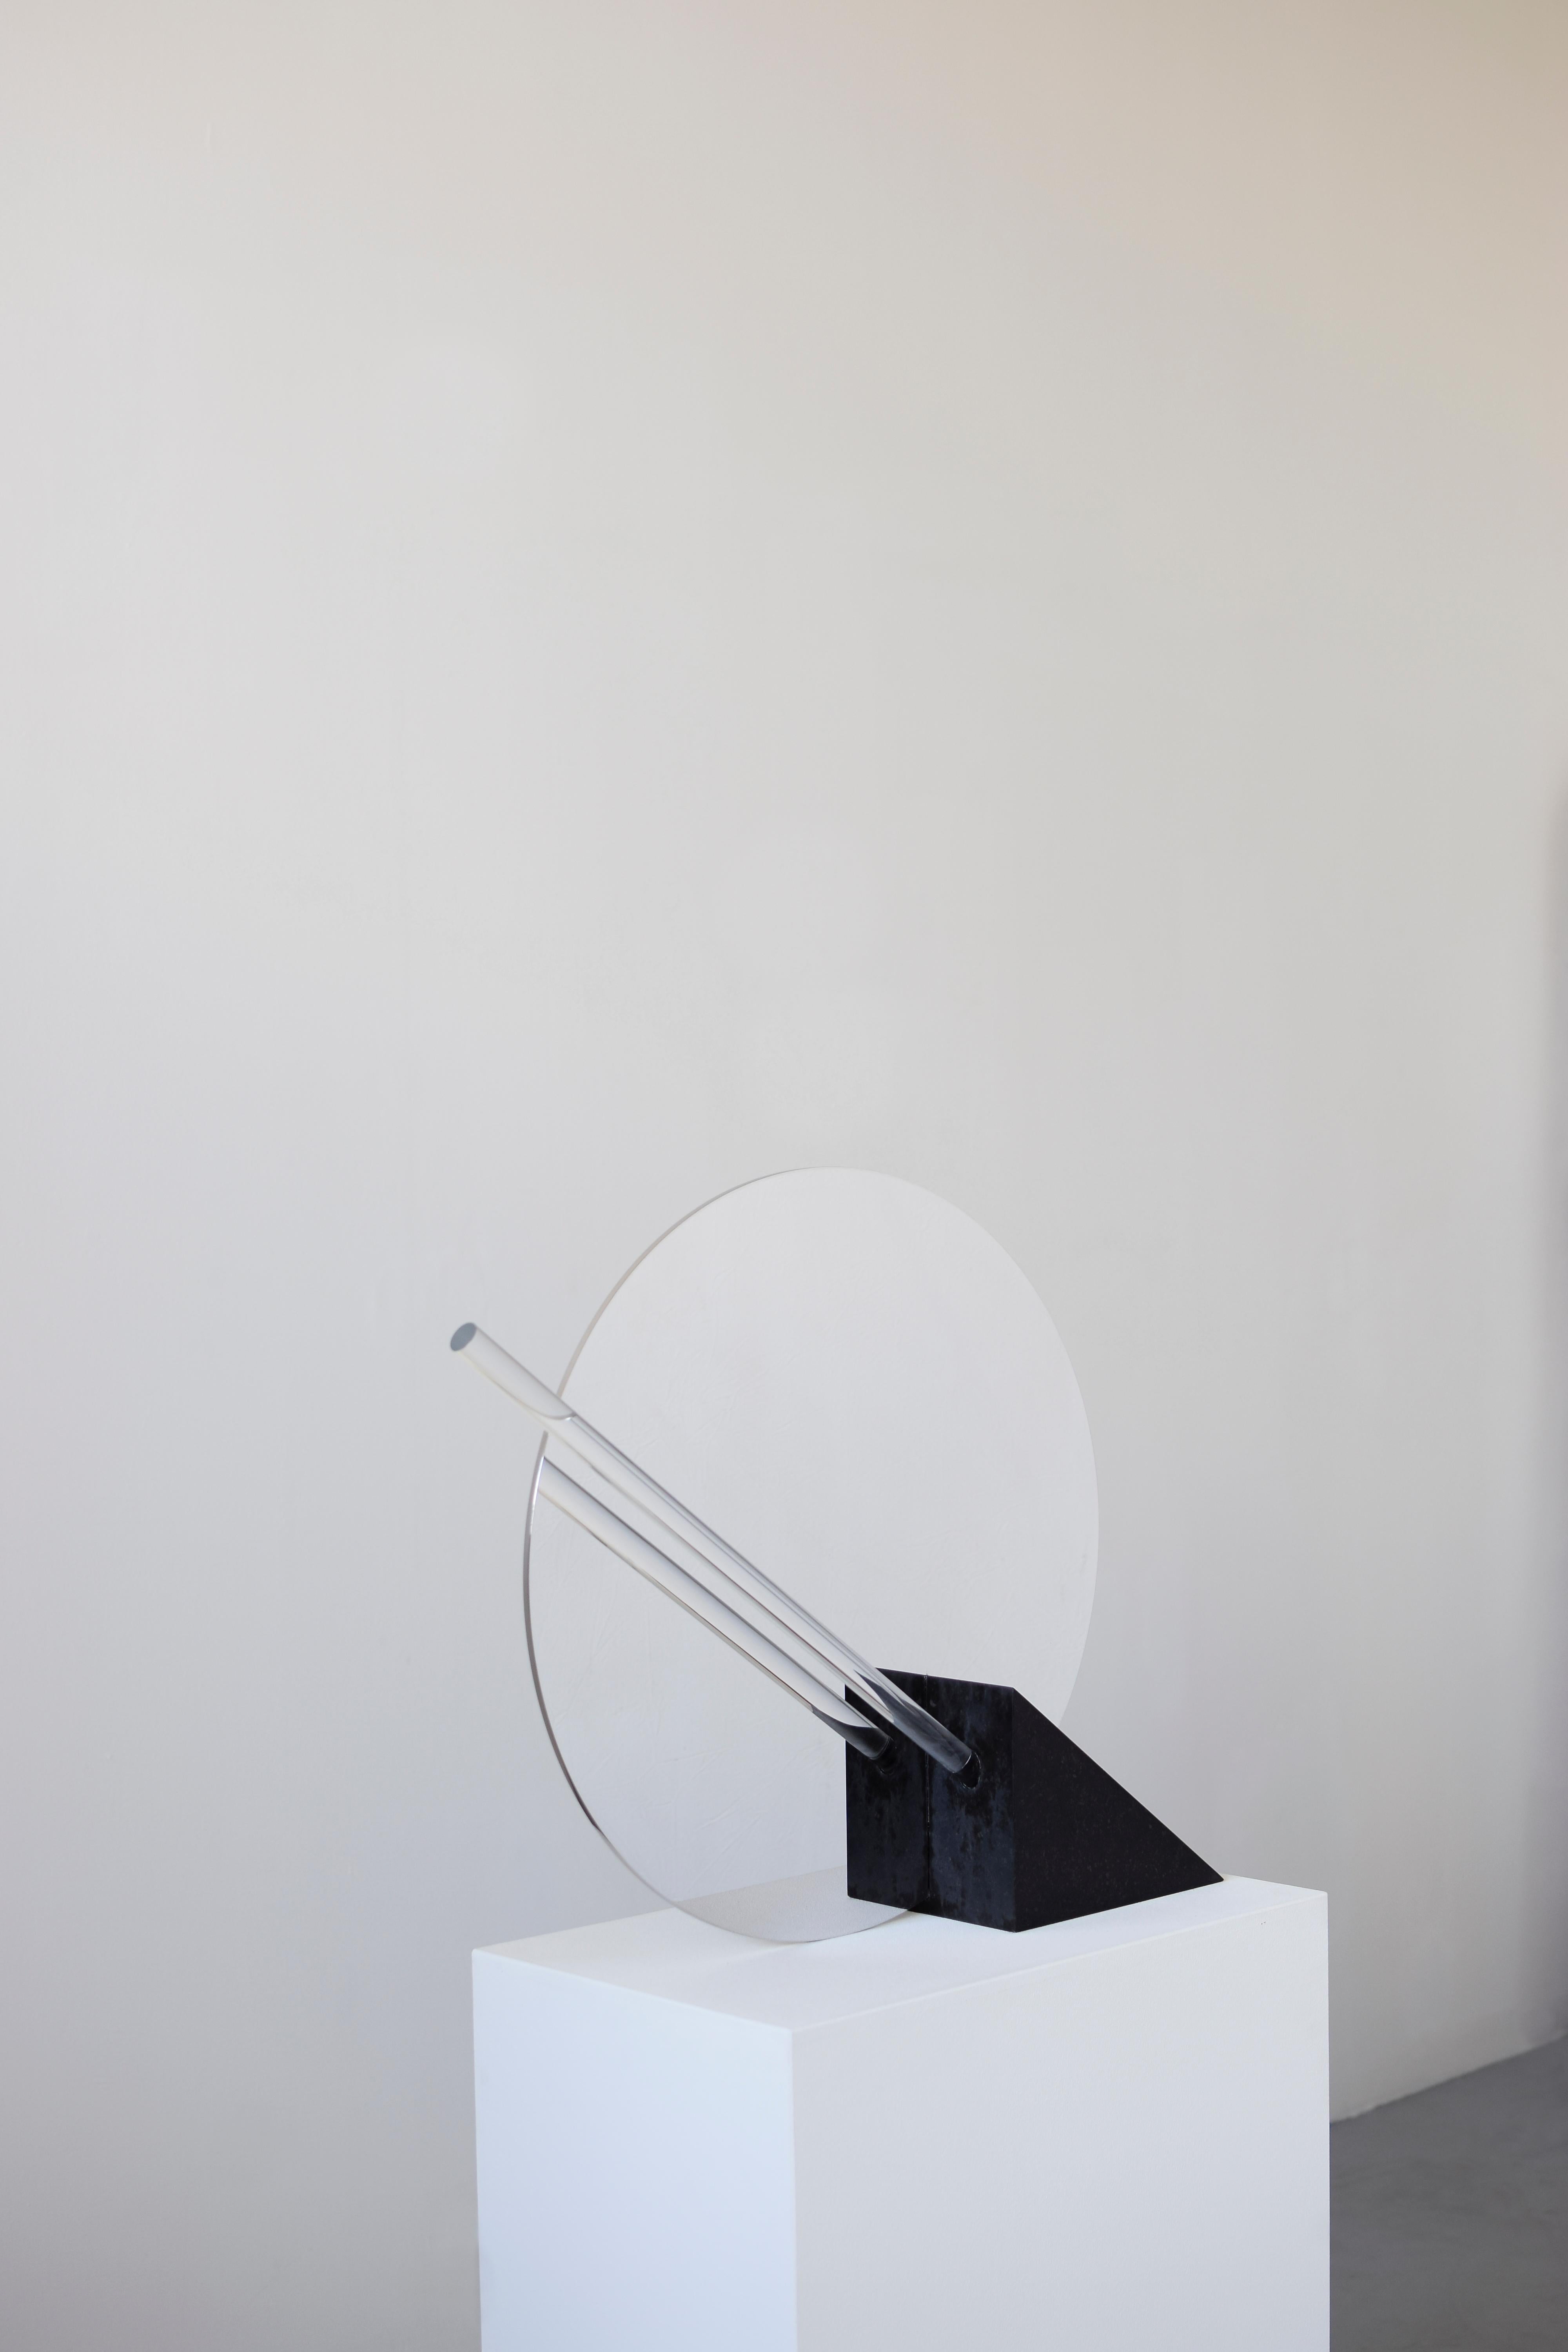 Elusive 03
A beautiful piece exploring the line between visible and invisible: half table lamp, half mirror, half sculpture.
By Maximilian Michaelis.

Belgium bluestone, polished stainless steel, acrylic glass, Led
Measure: 50 x 70 x 14 cm.